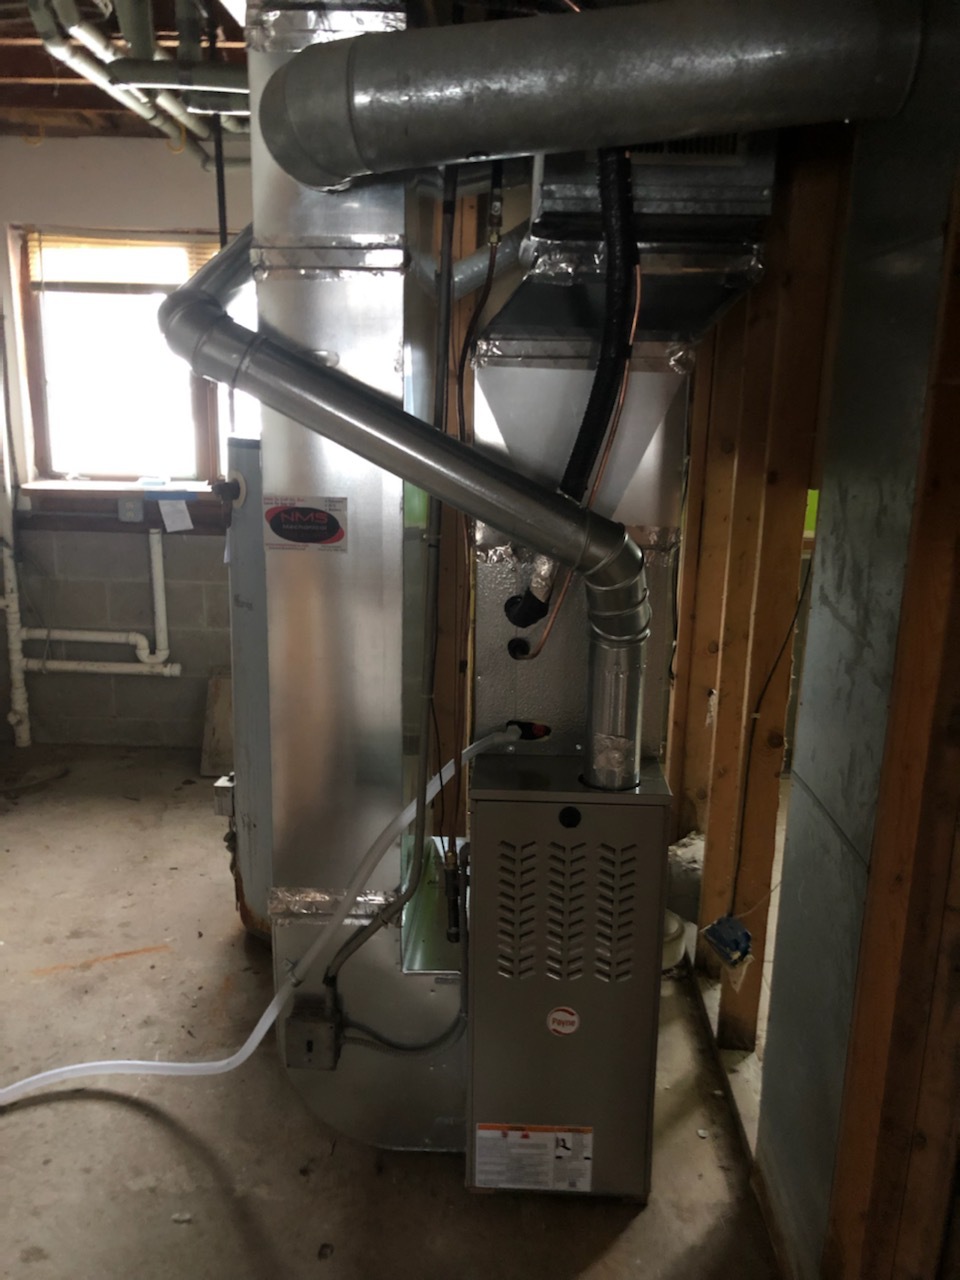 A view of the inside of a house with pipes and an air handler.